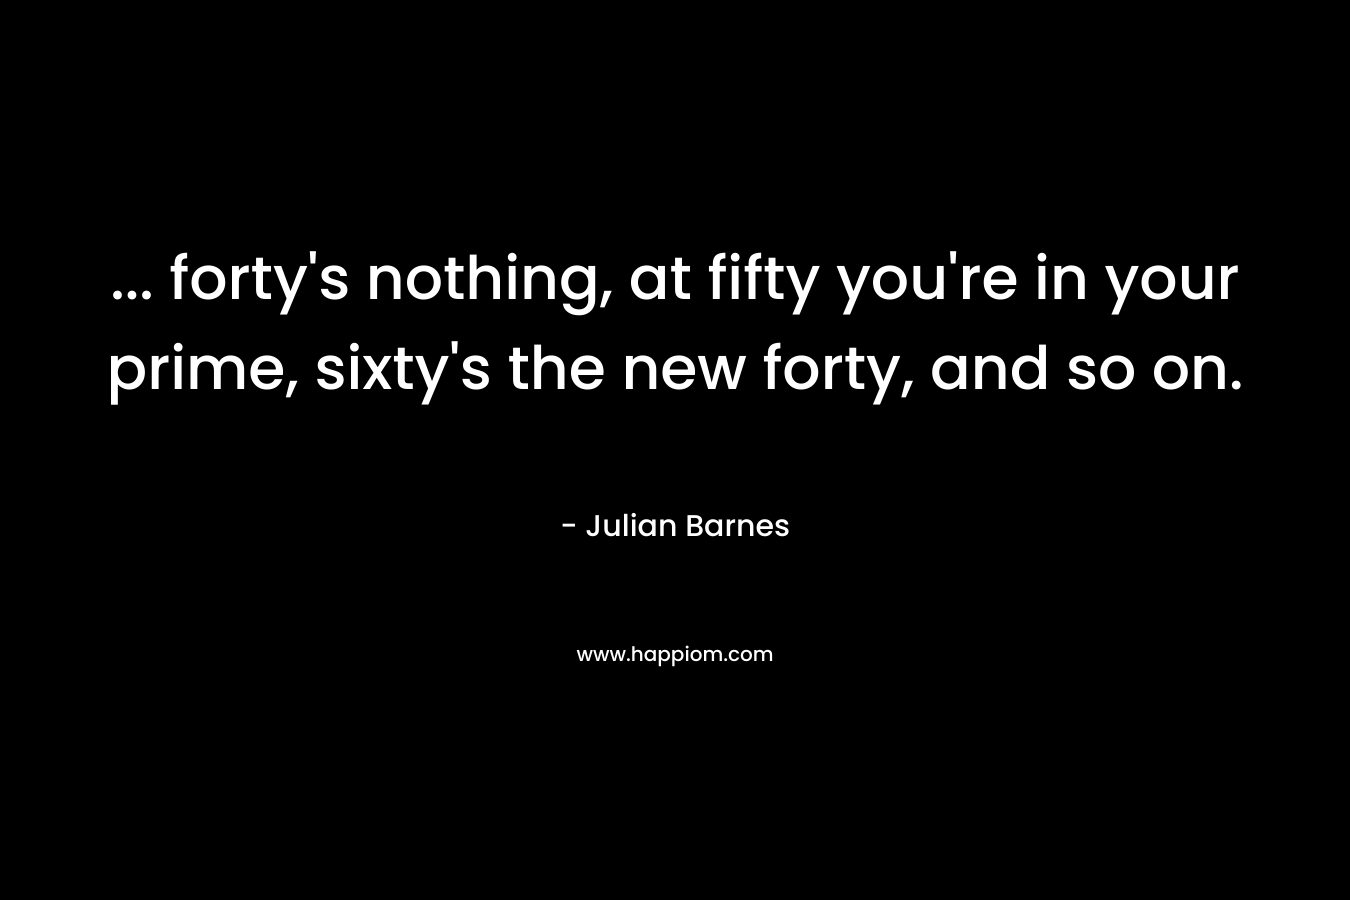 … forty’s nothing, at fifty you’re in your prime, sixty’s the new forty, and so on. – Julian Barnes